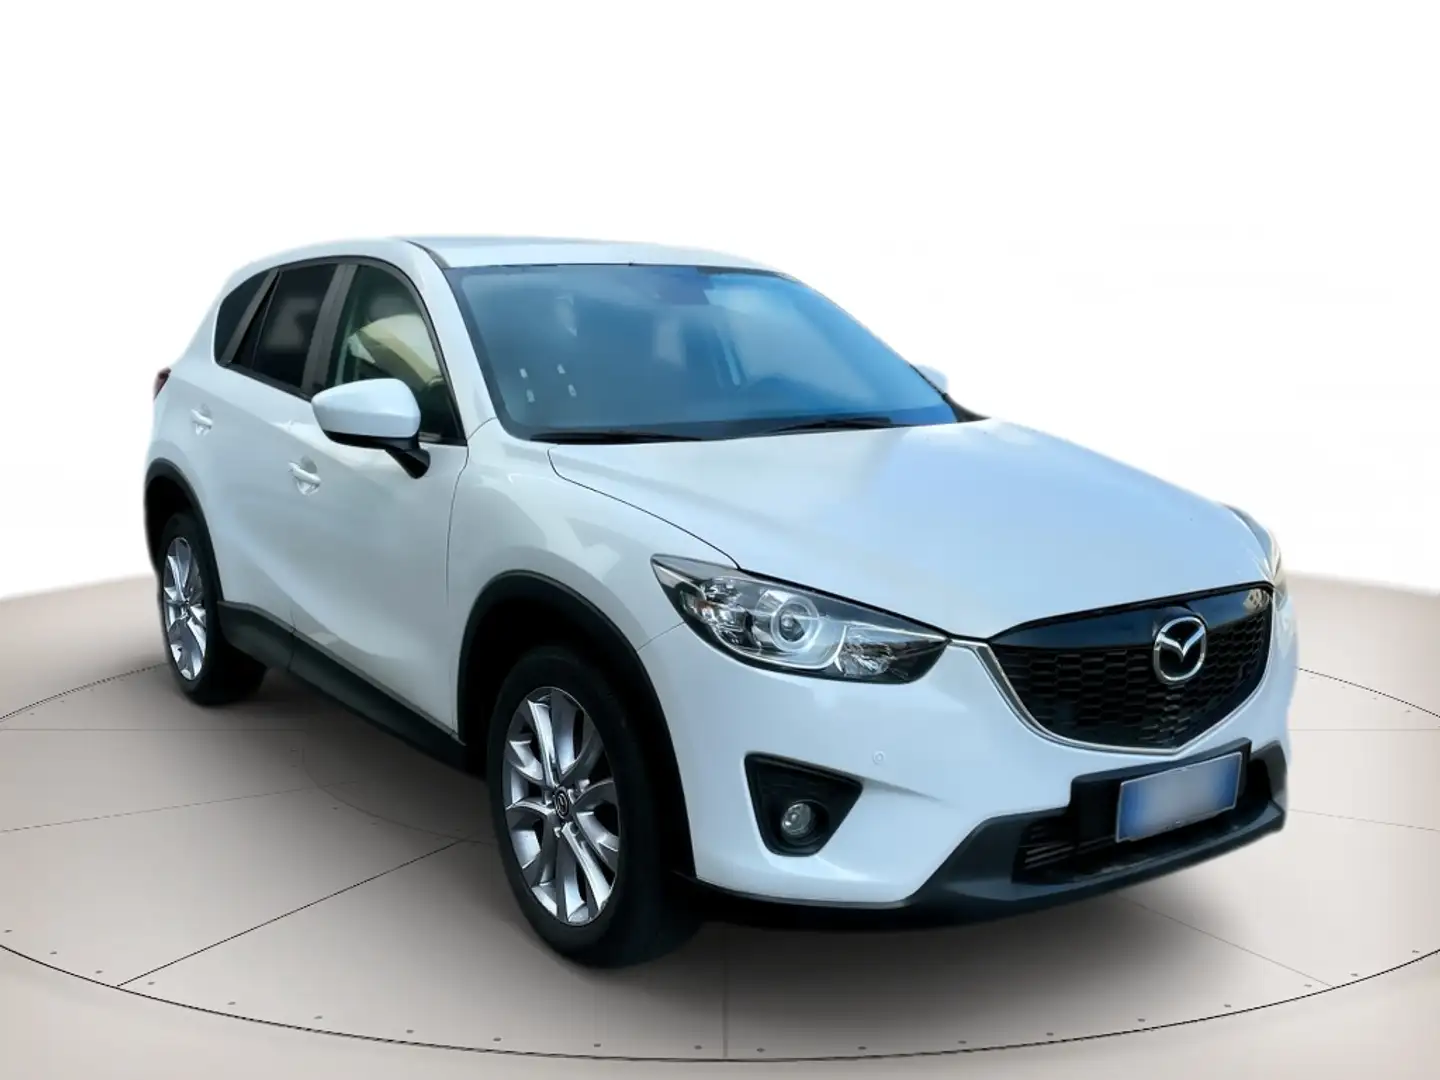 Mazda CX-5 I - CX-5 2.2 Exceed 4wd 150cv 6at Wit - 1